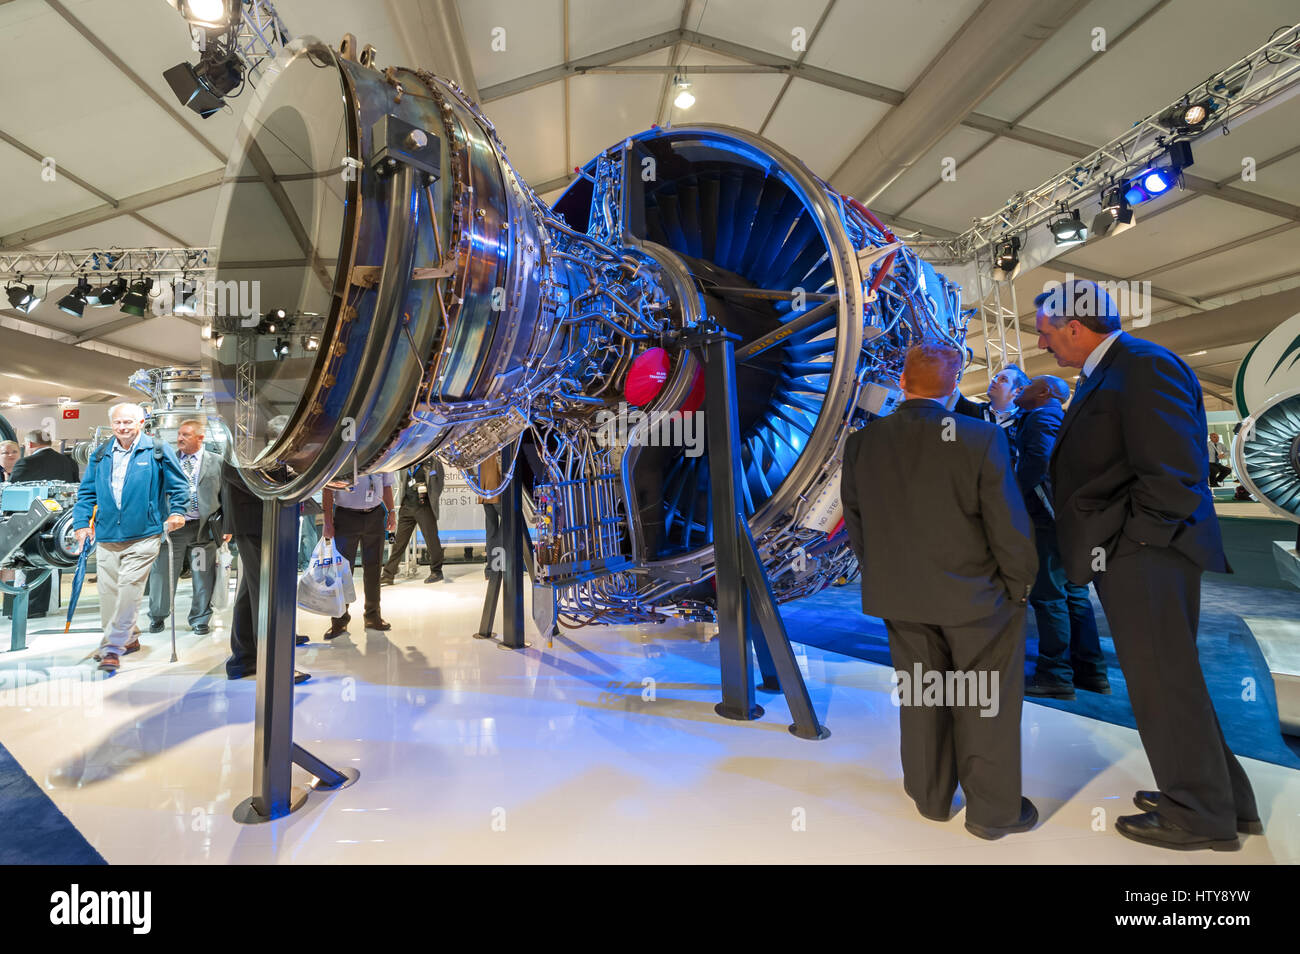 An exhibition by Rolls-Royce of the Boeing 787 power unit - the Trent 1000 jet engine at the Farnborough Airshow, UK on July 12, 2012 Stock Photo